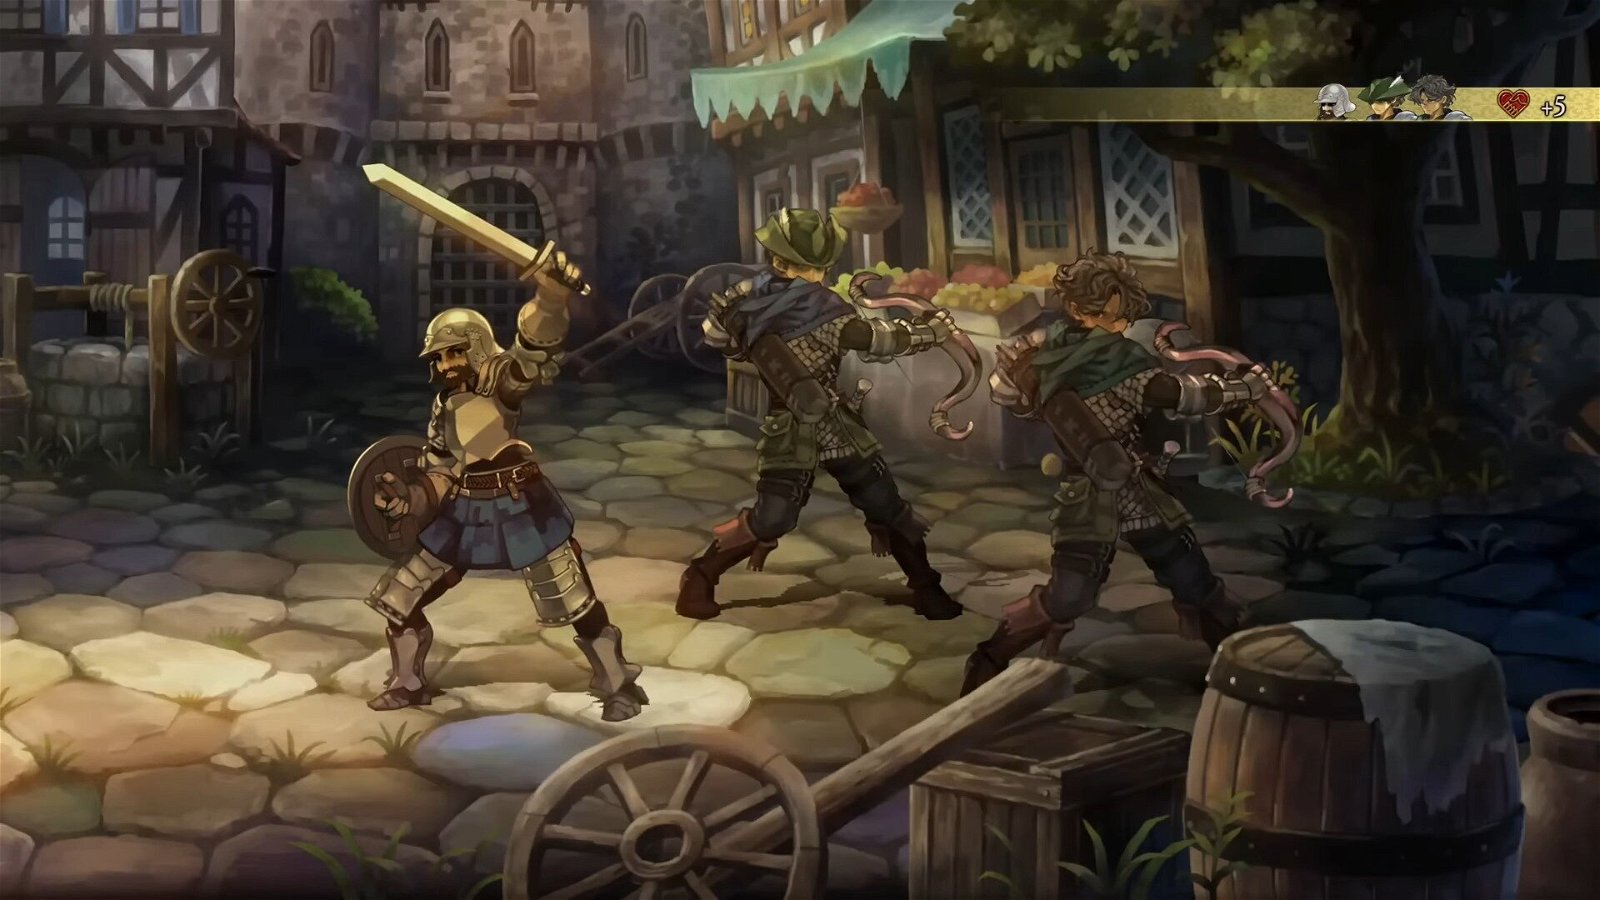 Tactical RPG Unicorn Overlord gets 8-minutes of gameplay footage